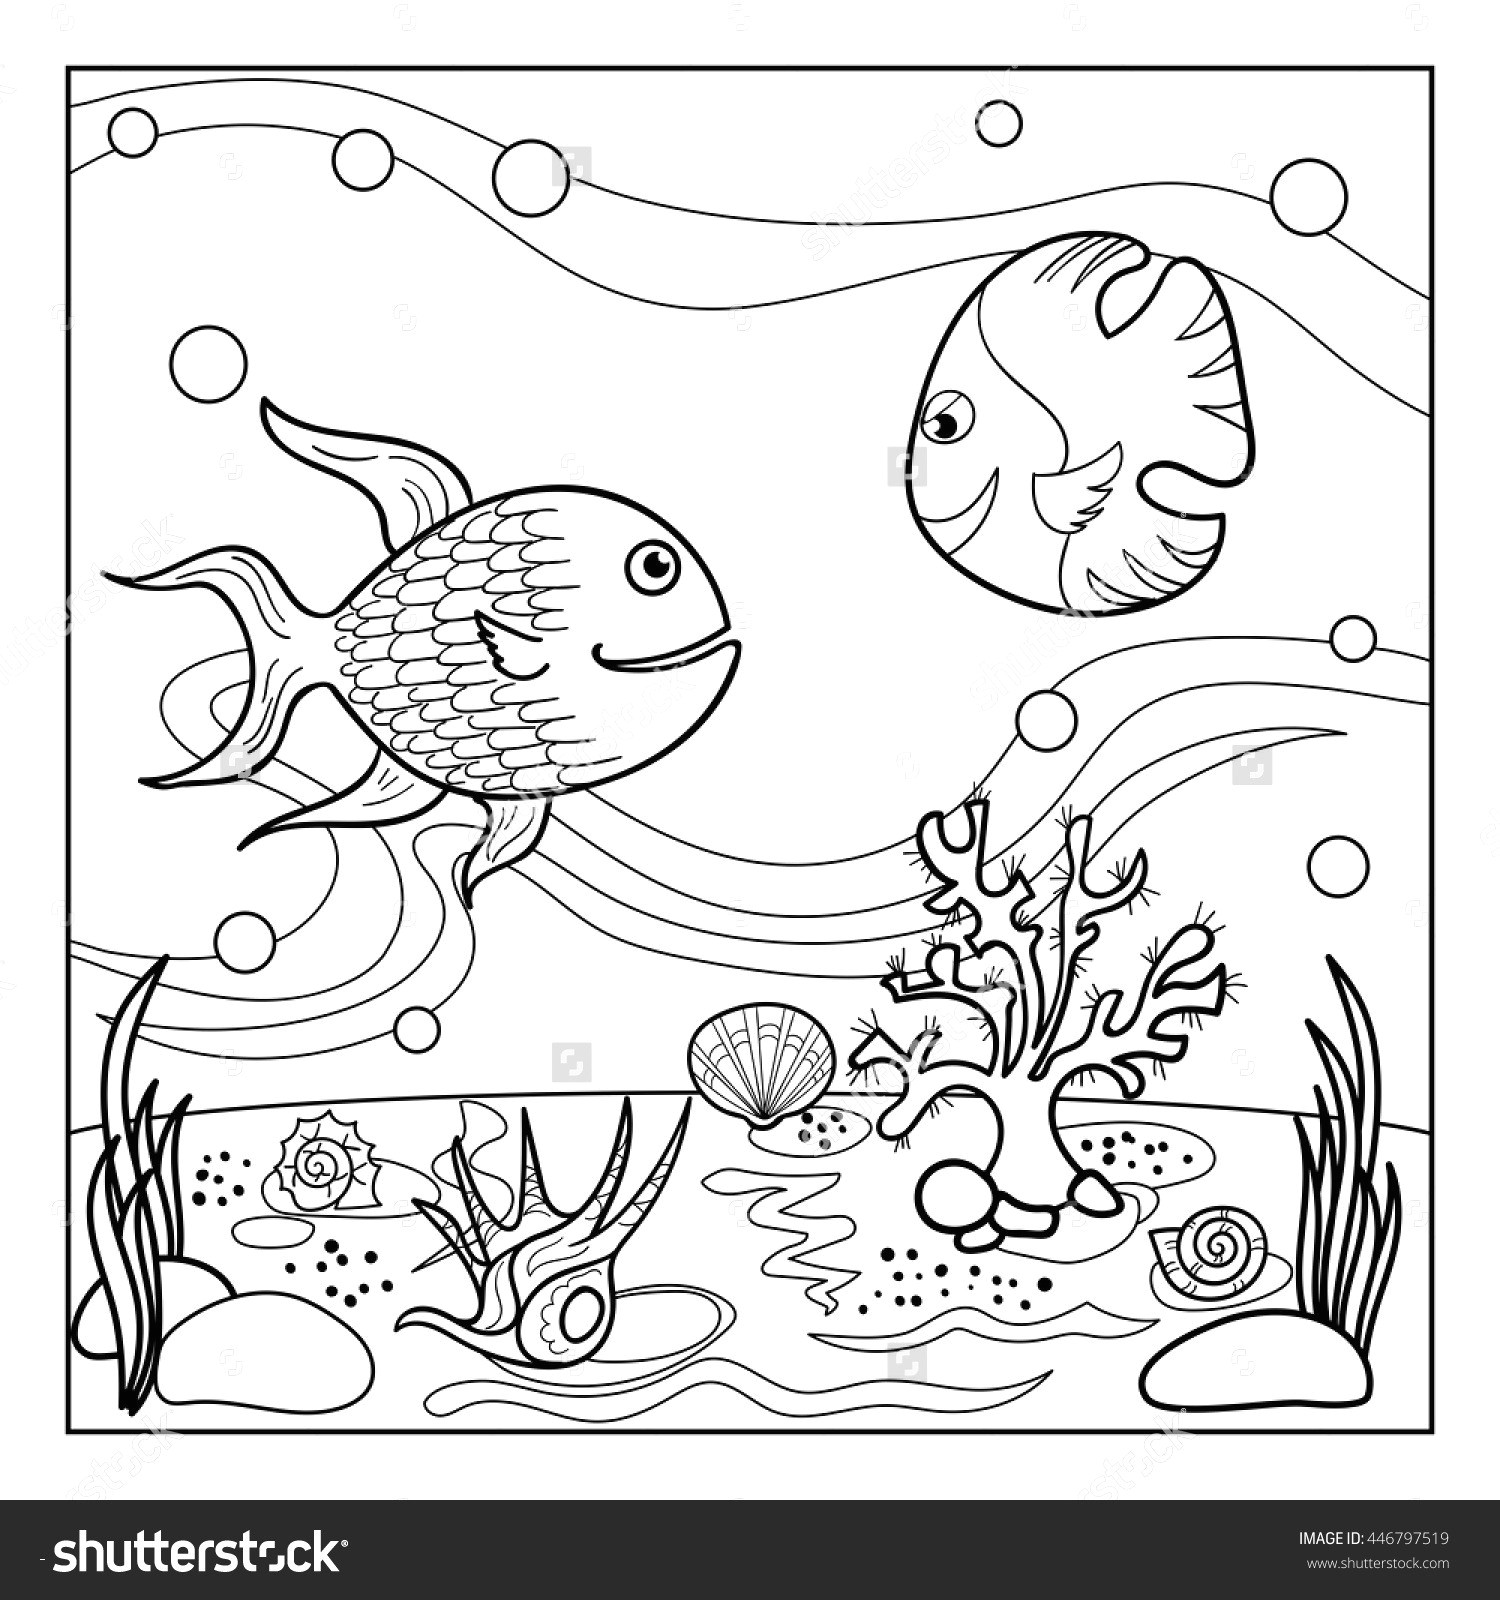 Drawing Of A Eye Easy Easy to Draw Feather Feather Coloring Page Fresh Home Coloring Pages